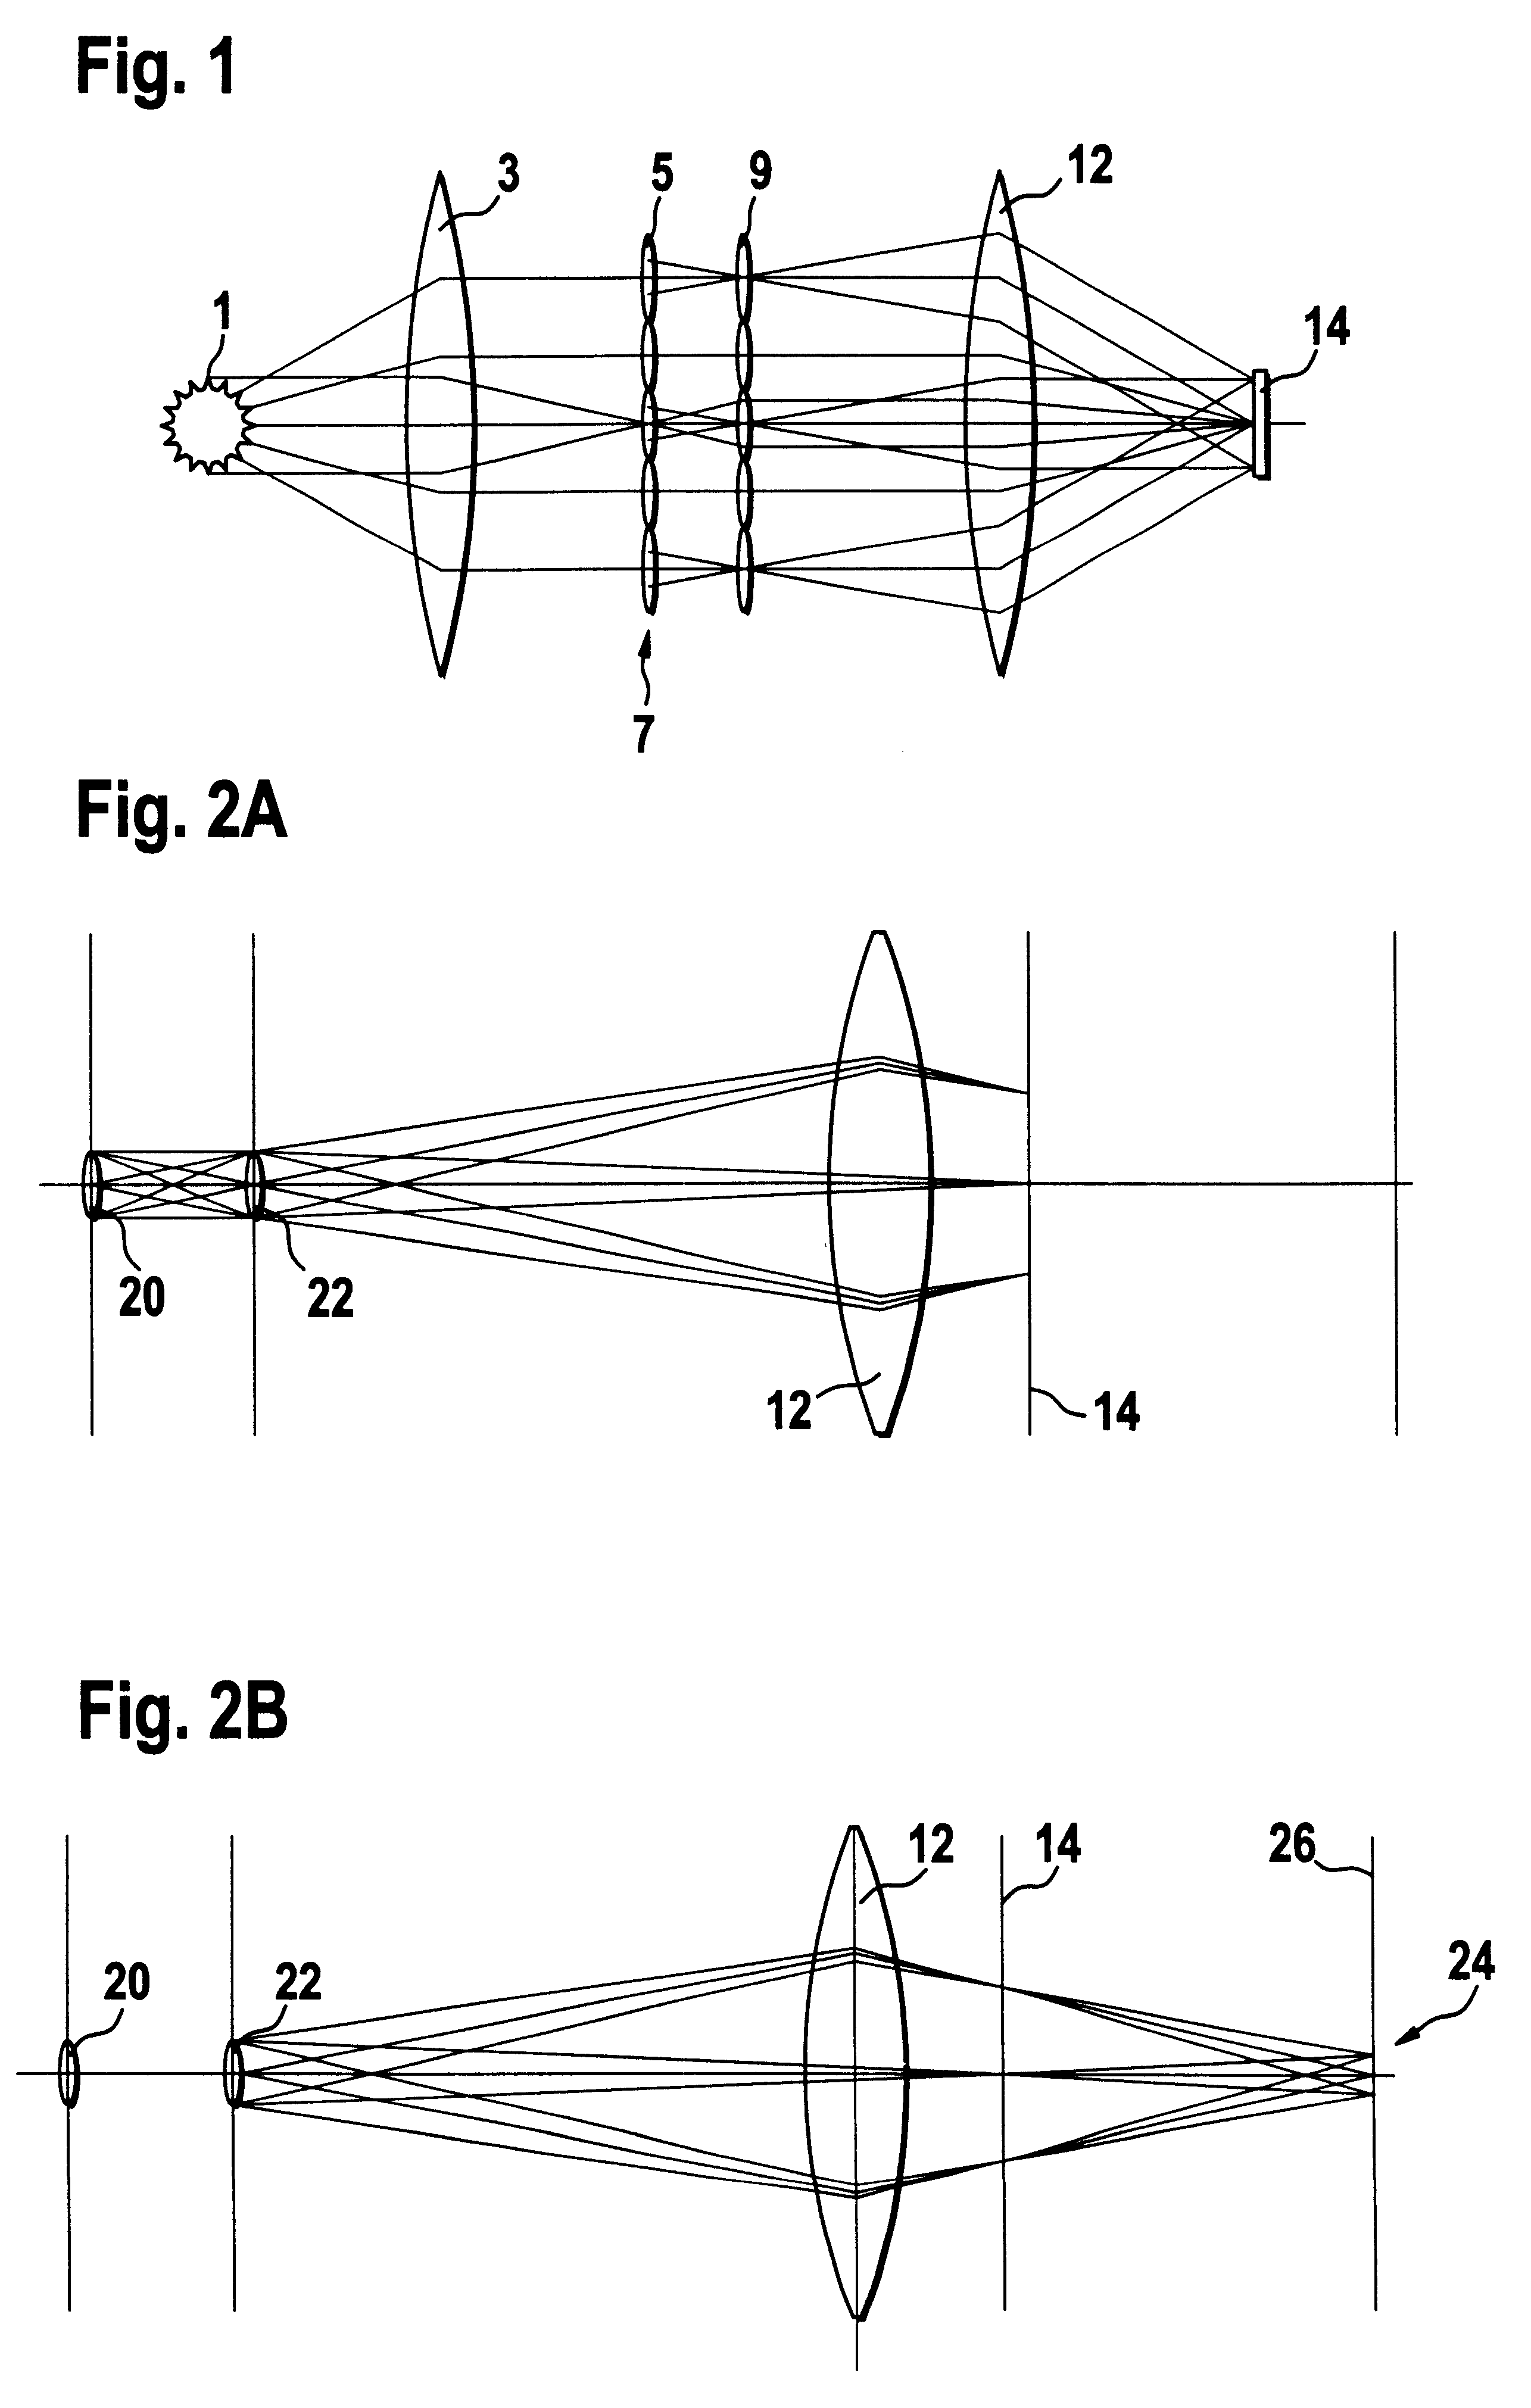 Illumination system particularly for microlithography